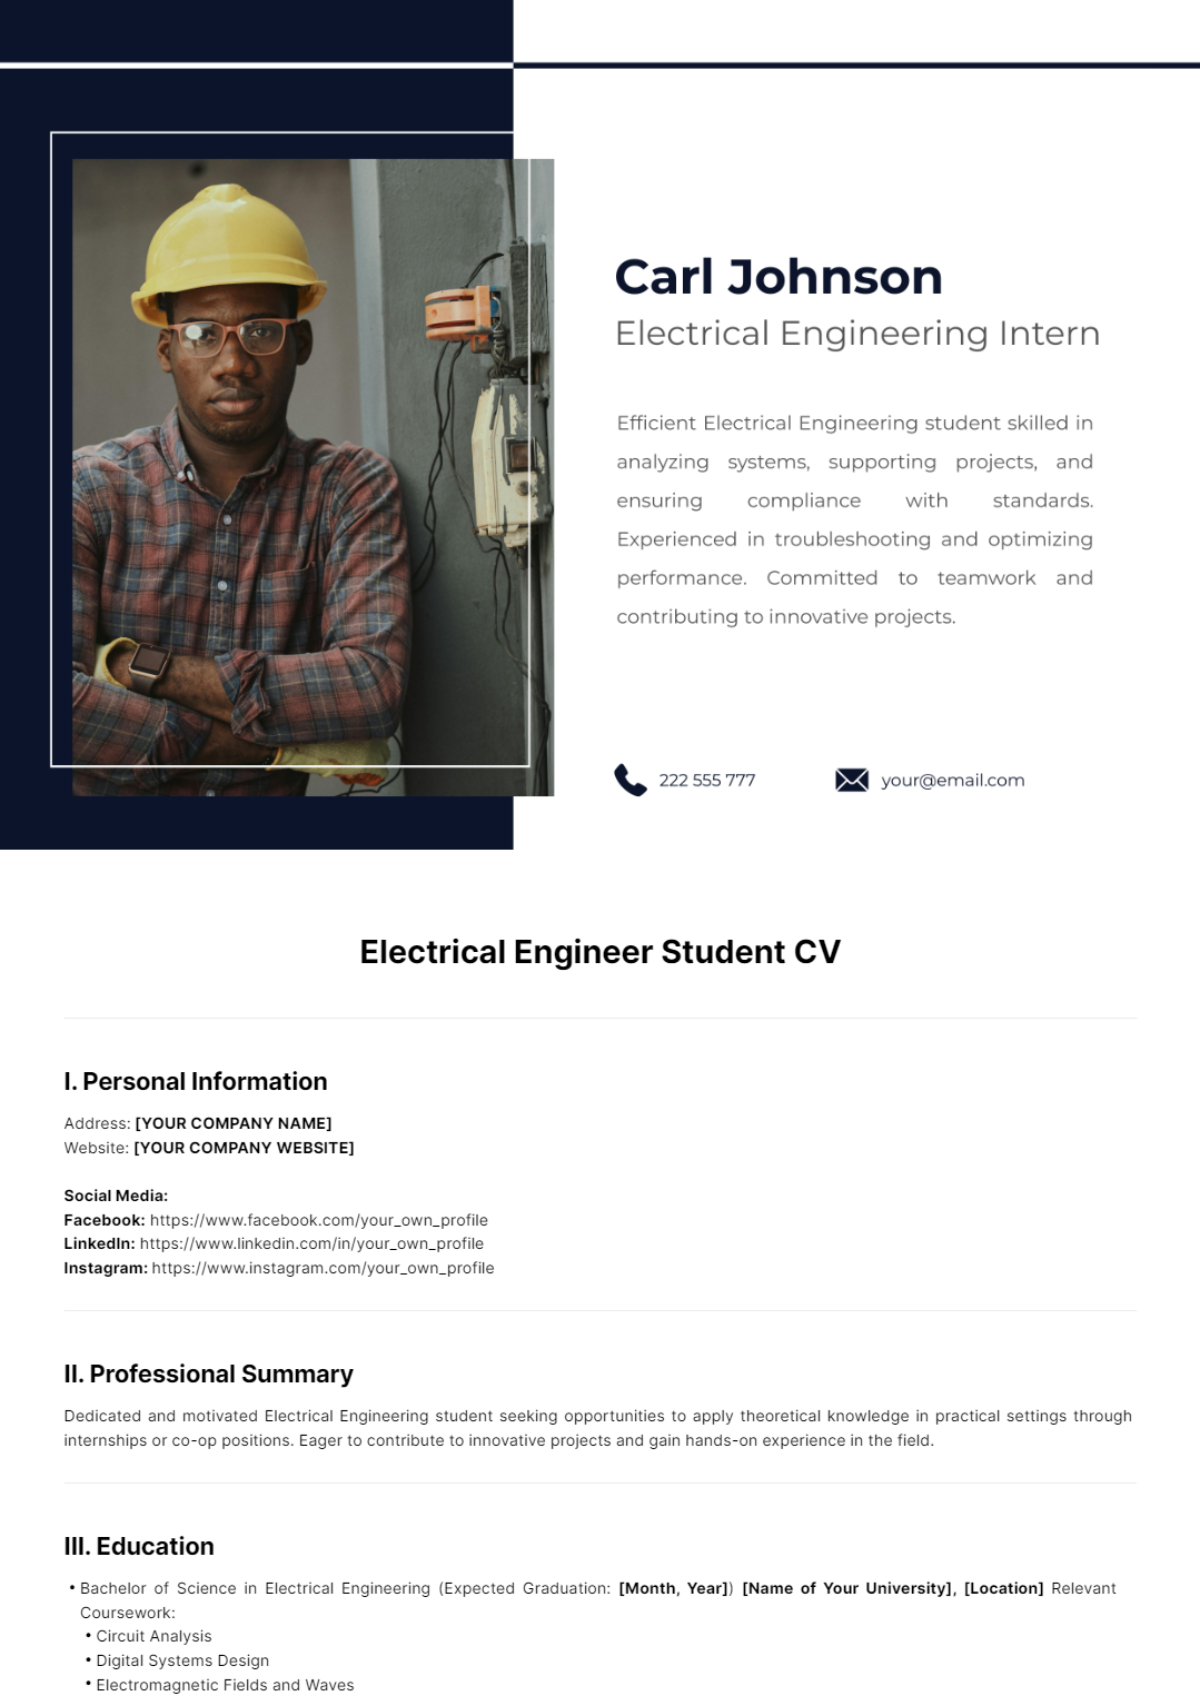 Free Electrical Engineer Student CV Template